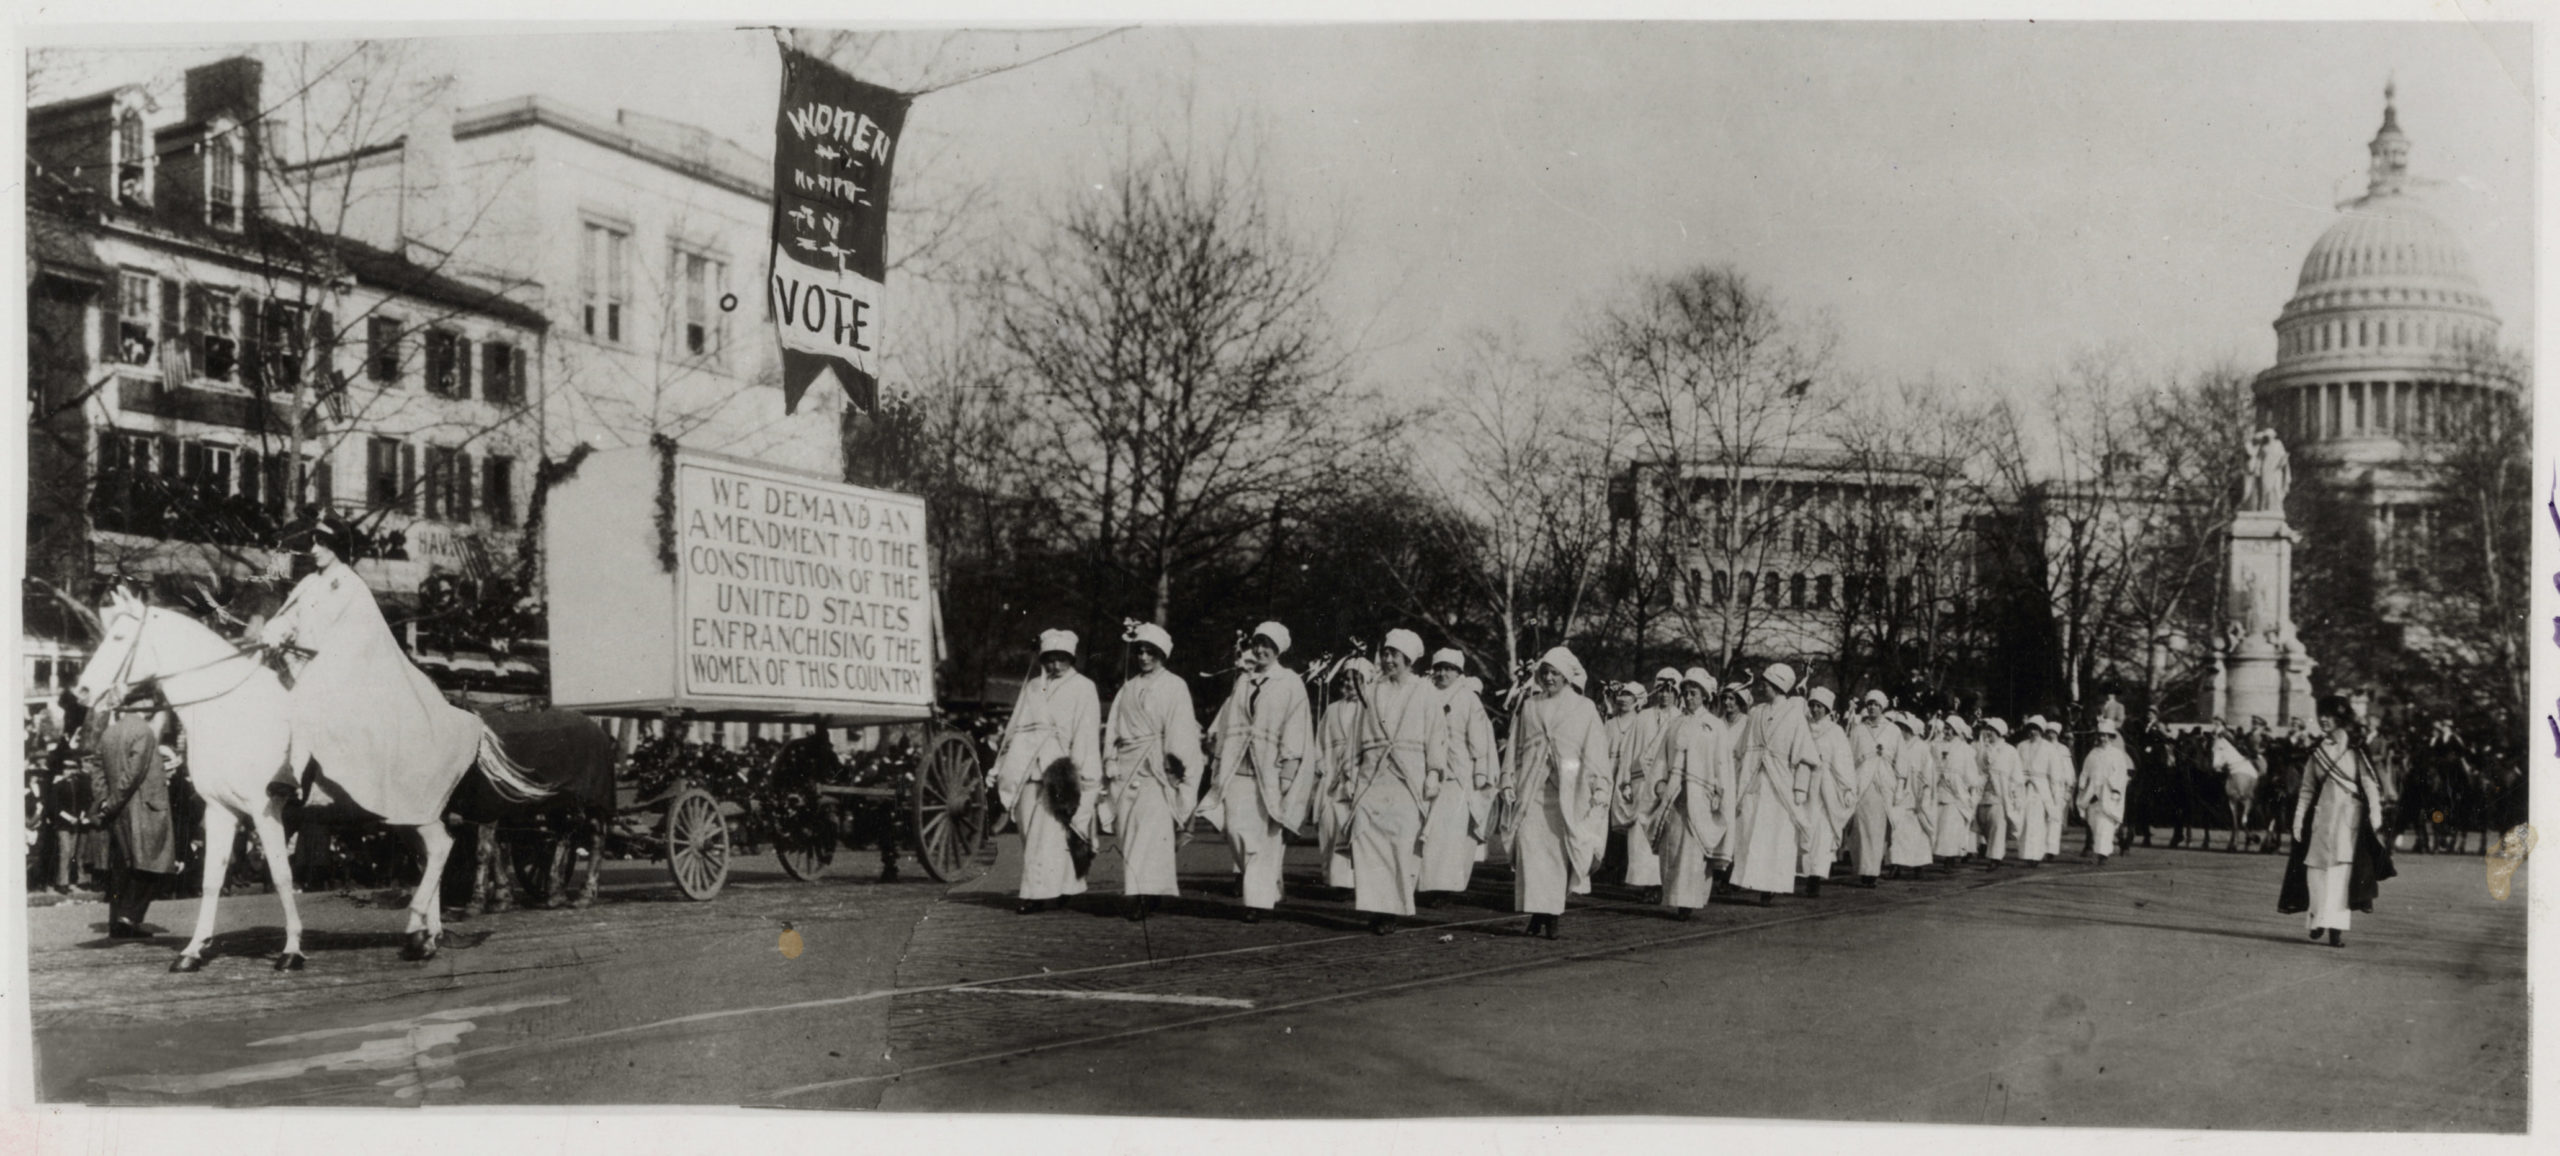 Women Marching in Suffrage Parade, Washington, DC, 1913 from National Archives